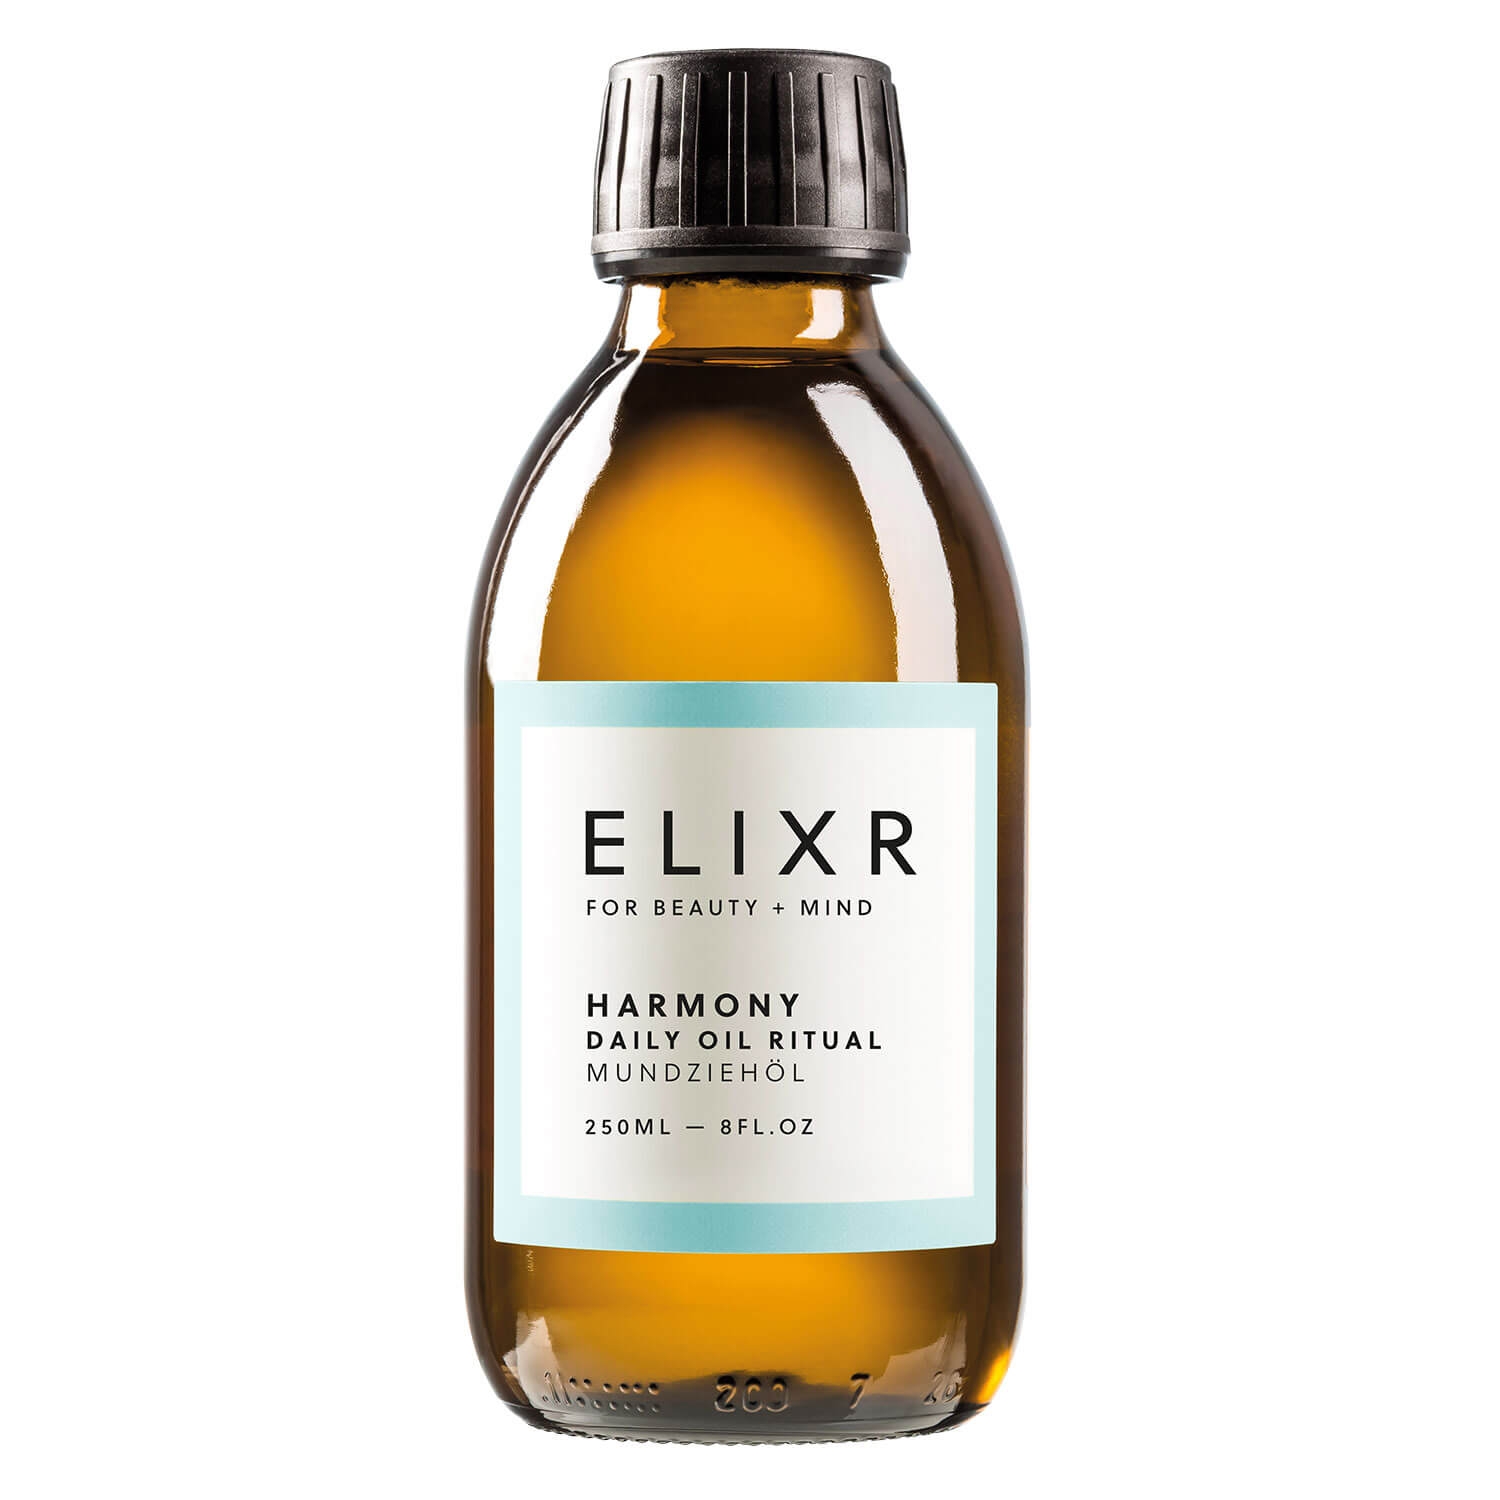 Product image from Daily Oil Rituals - HARMONY Mundziehöl